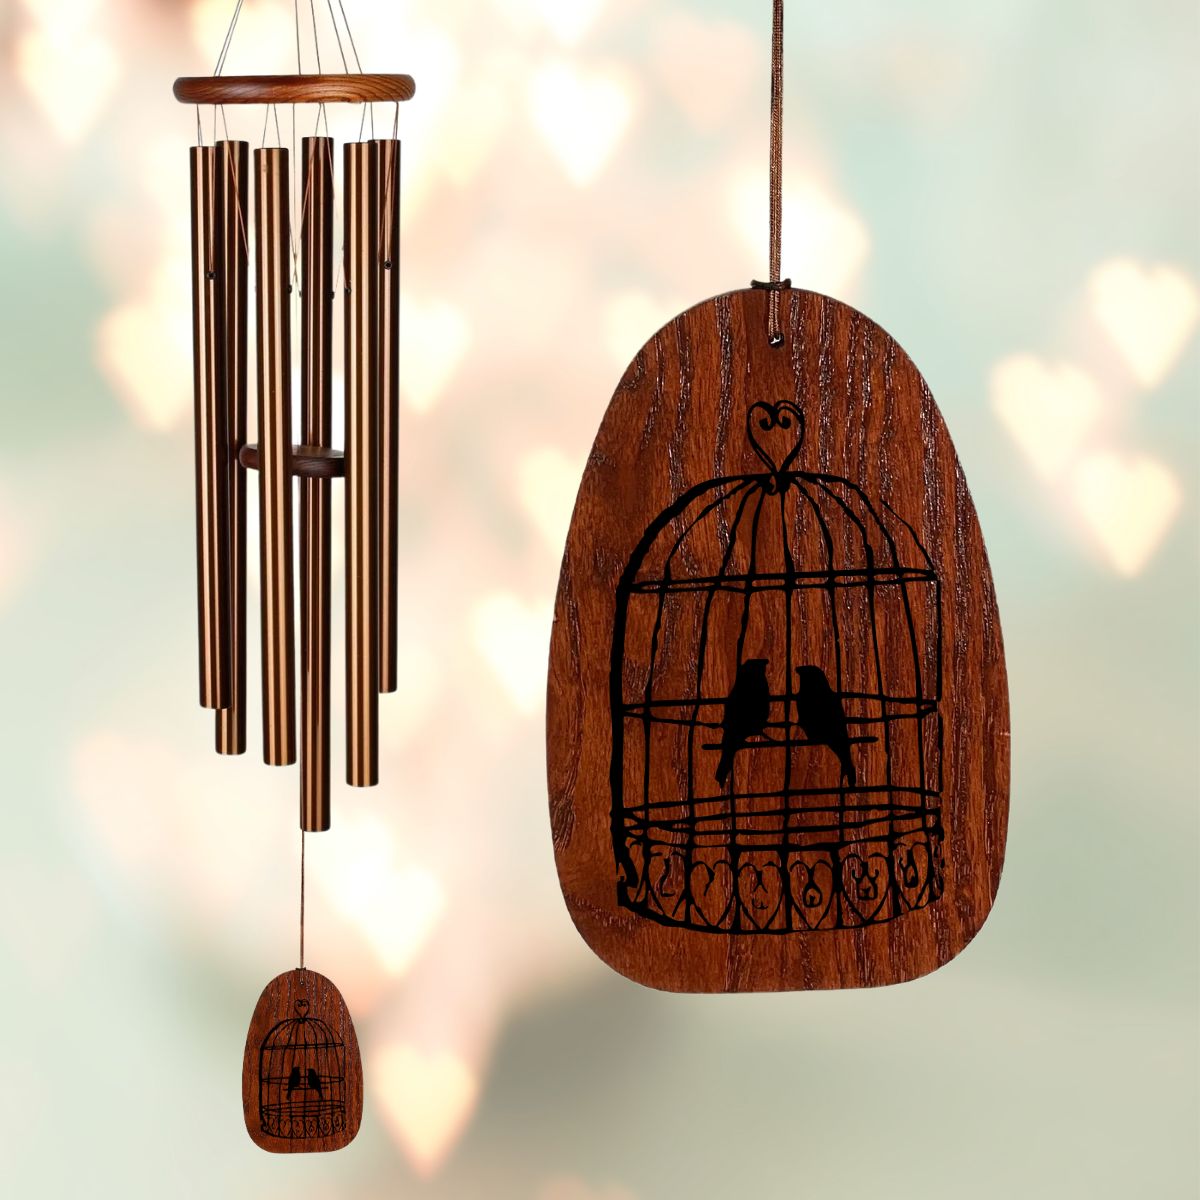 Amazing Grace 40 Inch Wind Chime - Engravable Bird Cage